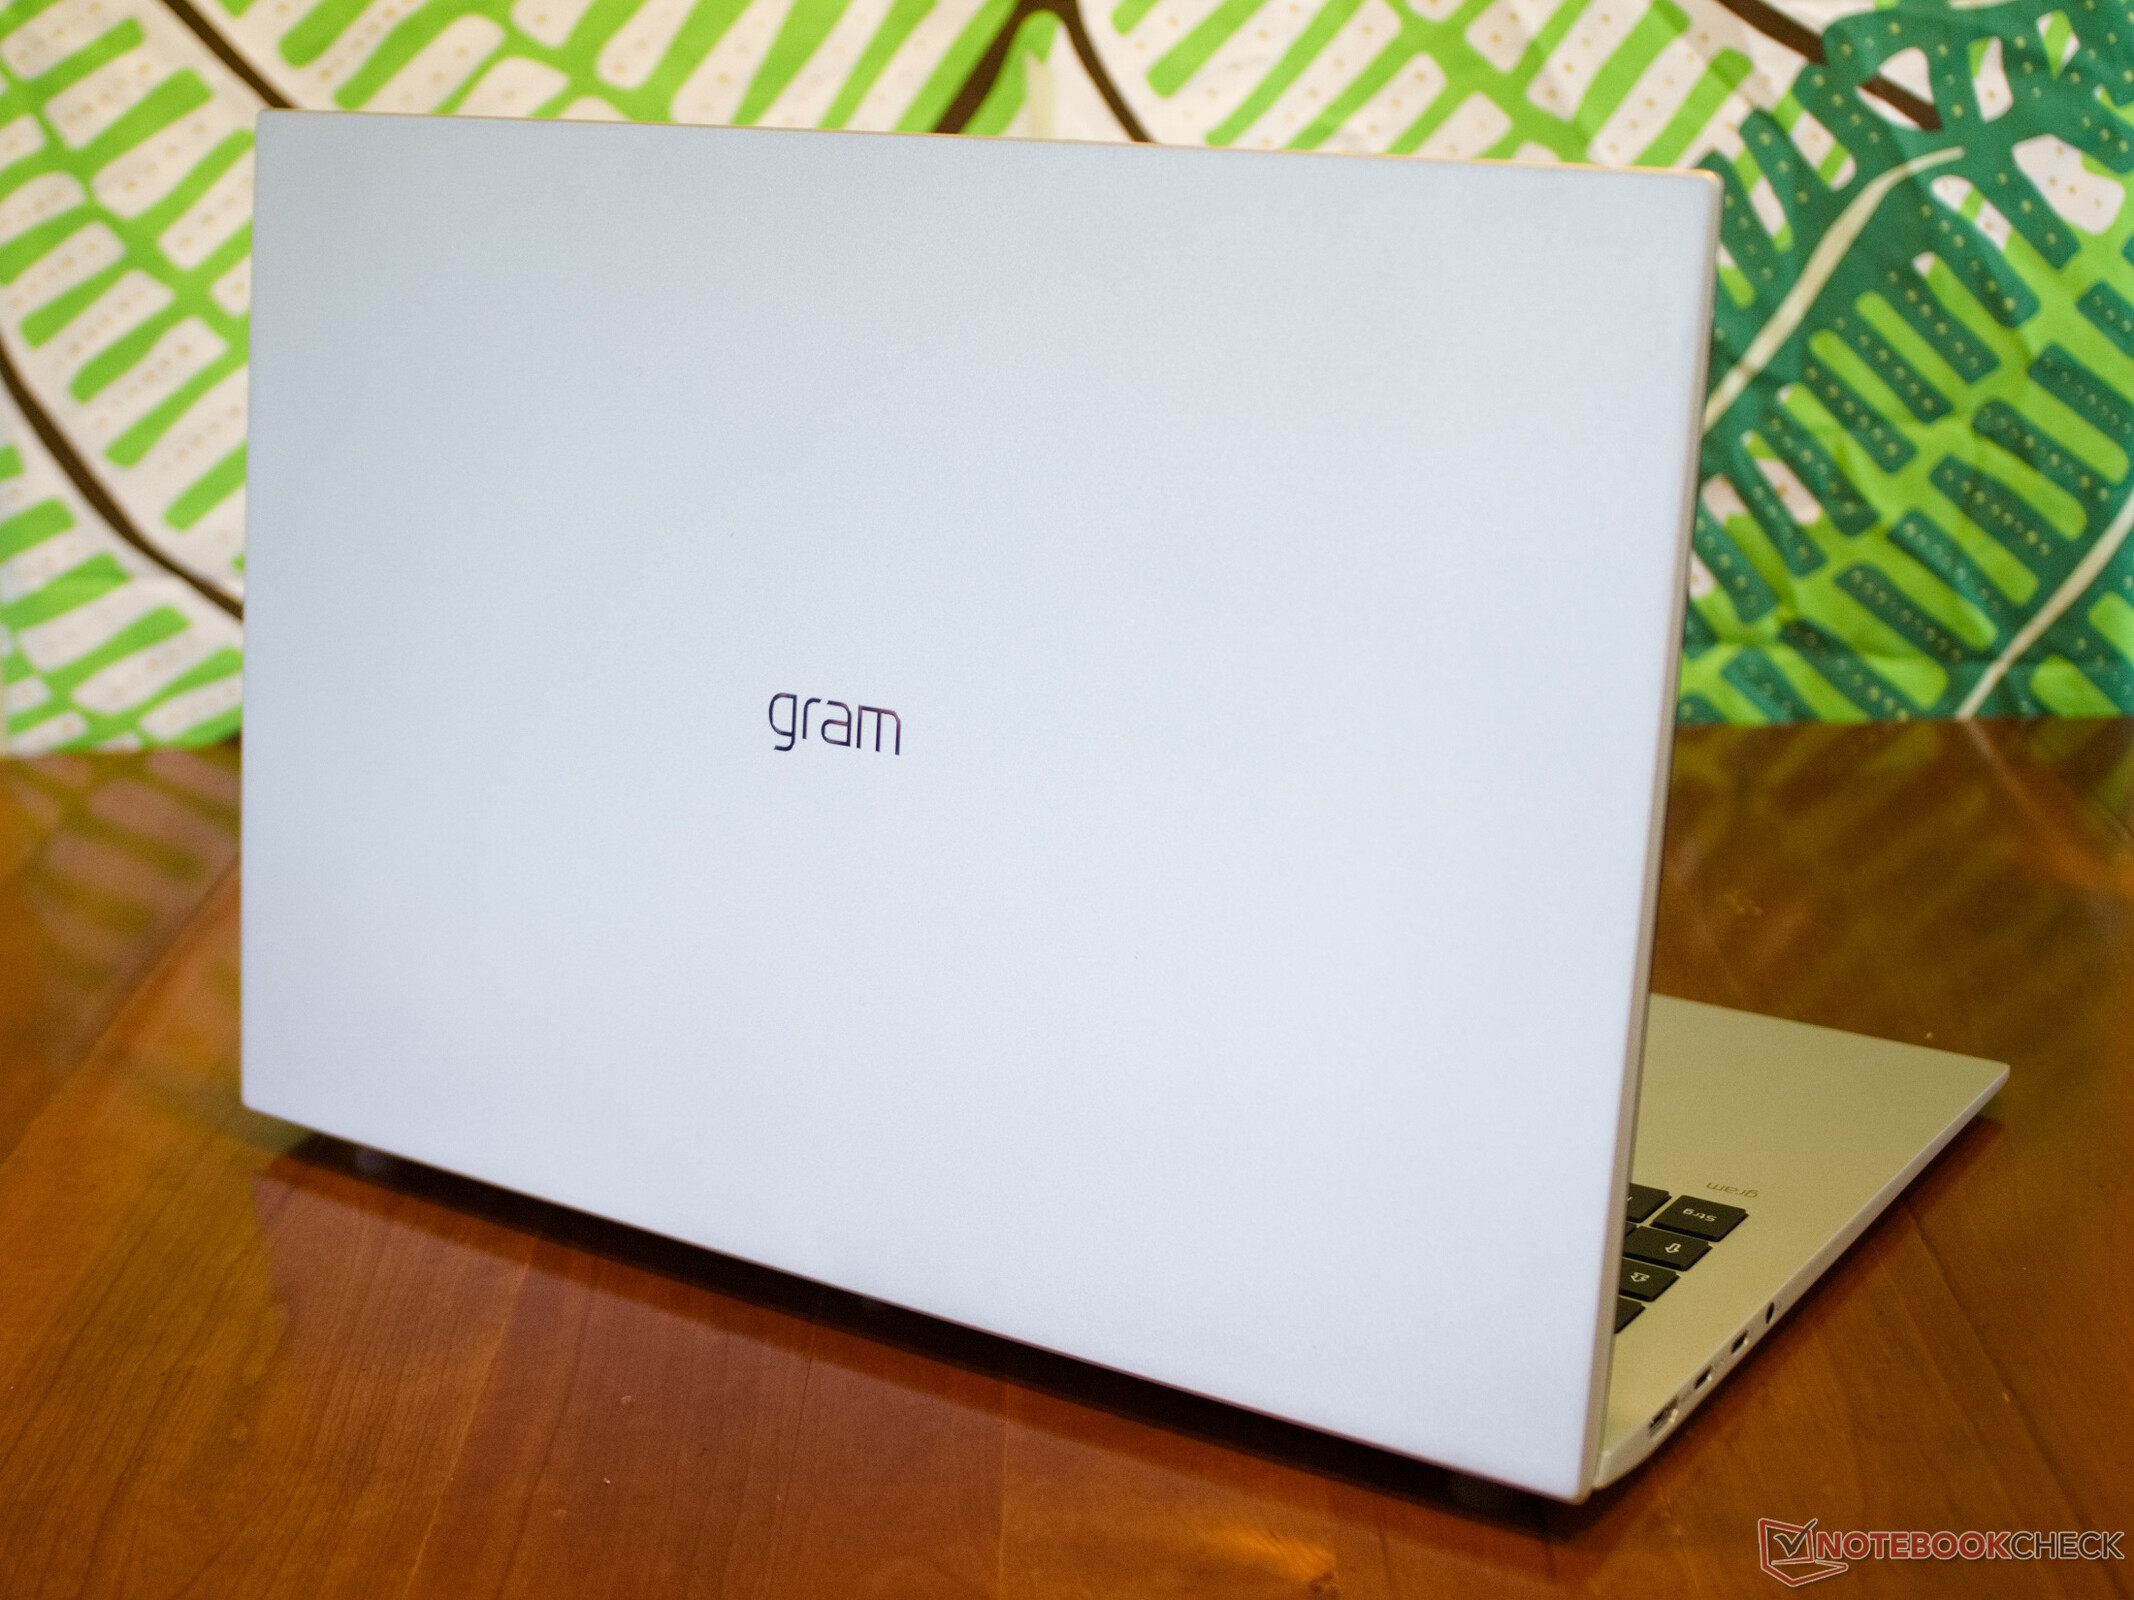 LG Gram 17 (2021) review: Still the benchmark for 17-inch